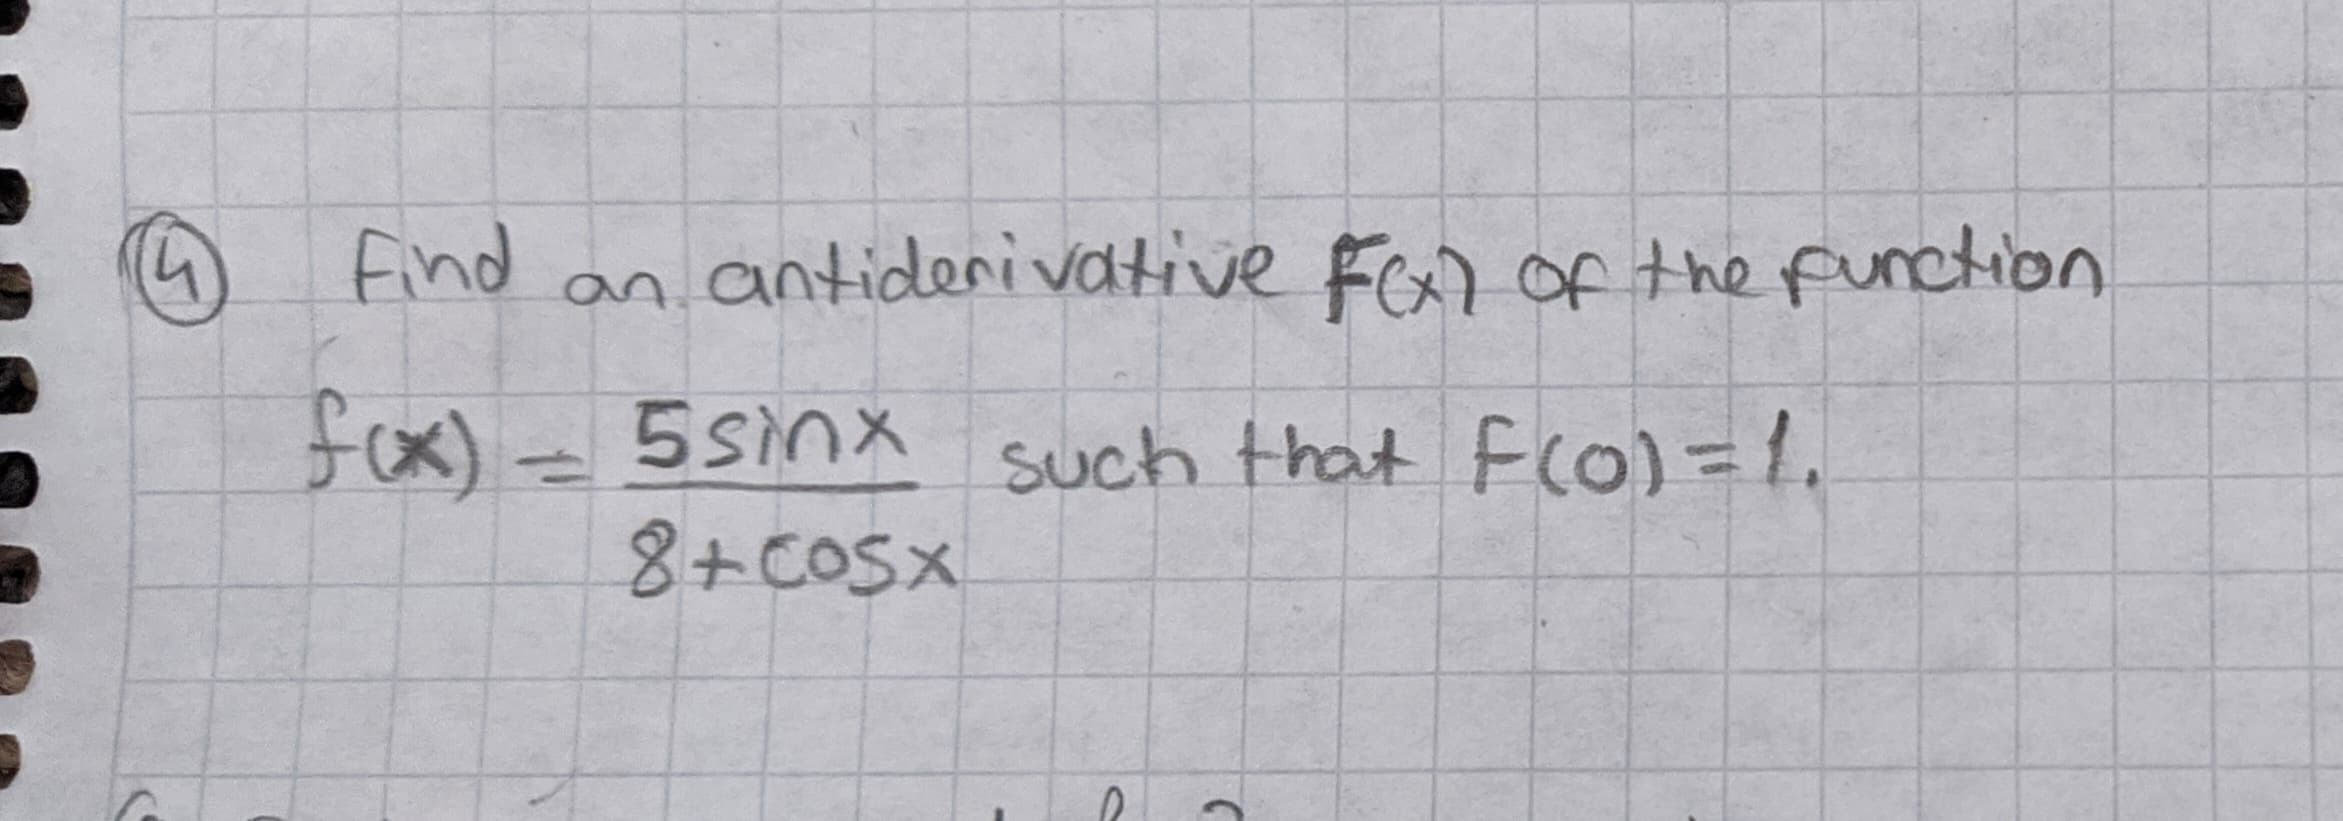 find
antiderivative For of the function
an
ix)-5sinx such that FCO)=1.
